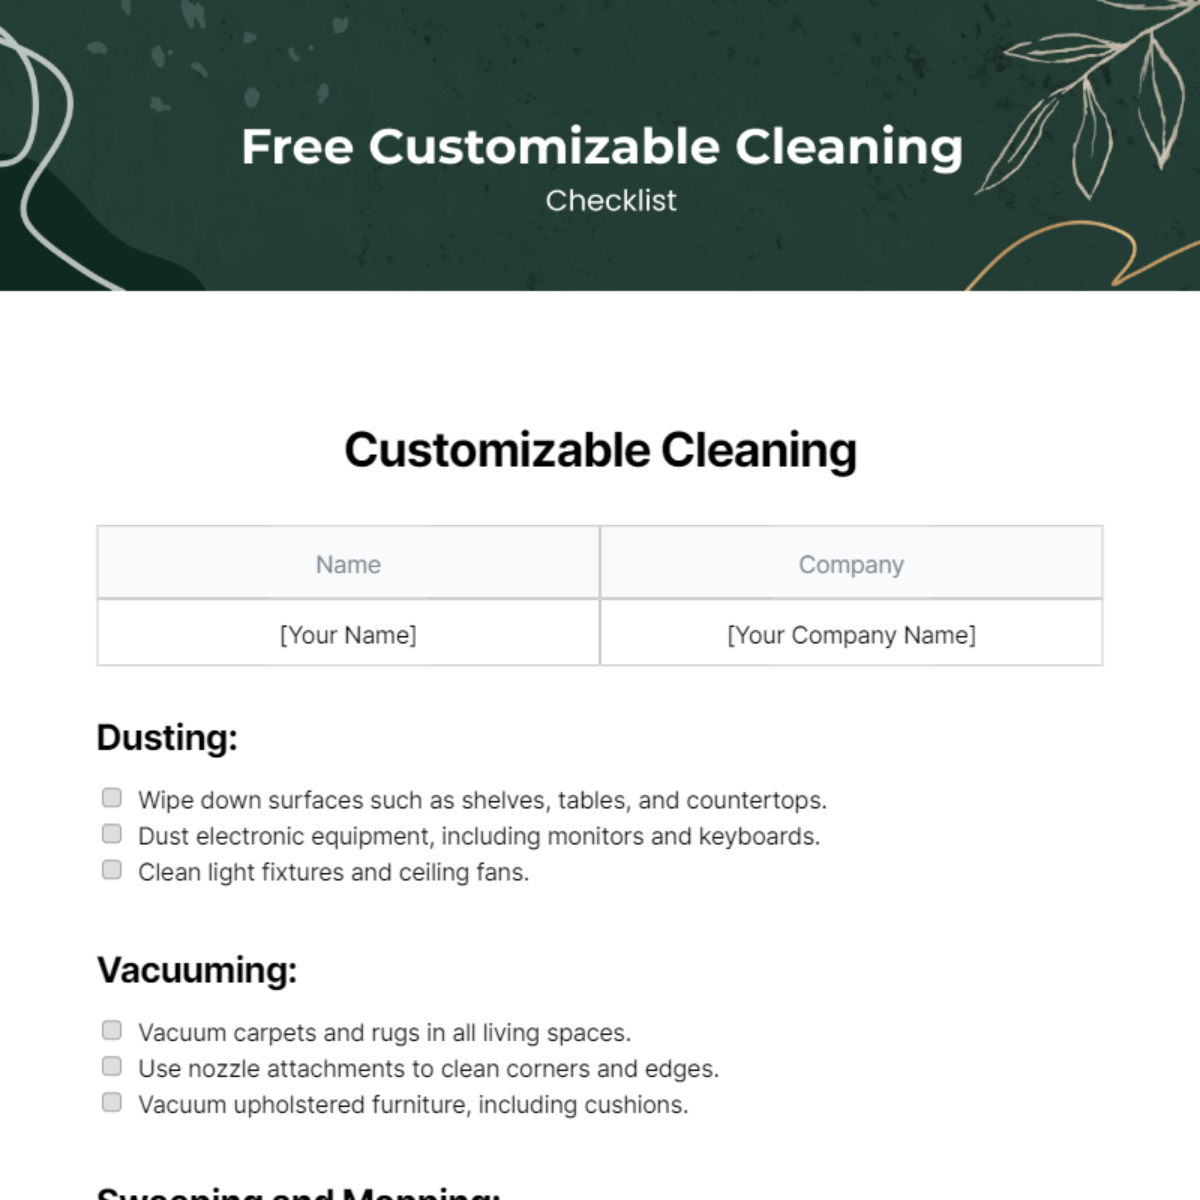 Free Customizable Cleaning Checklist Template